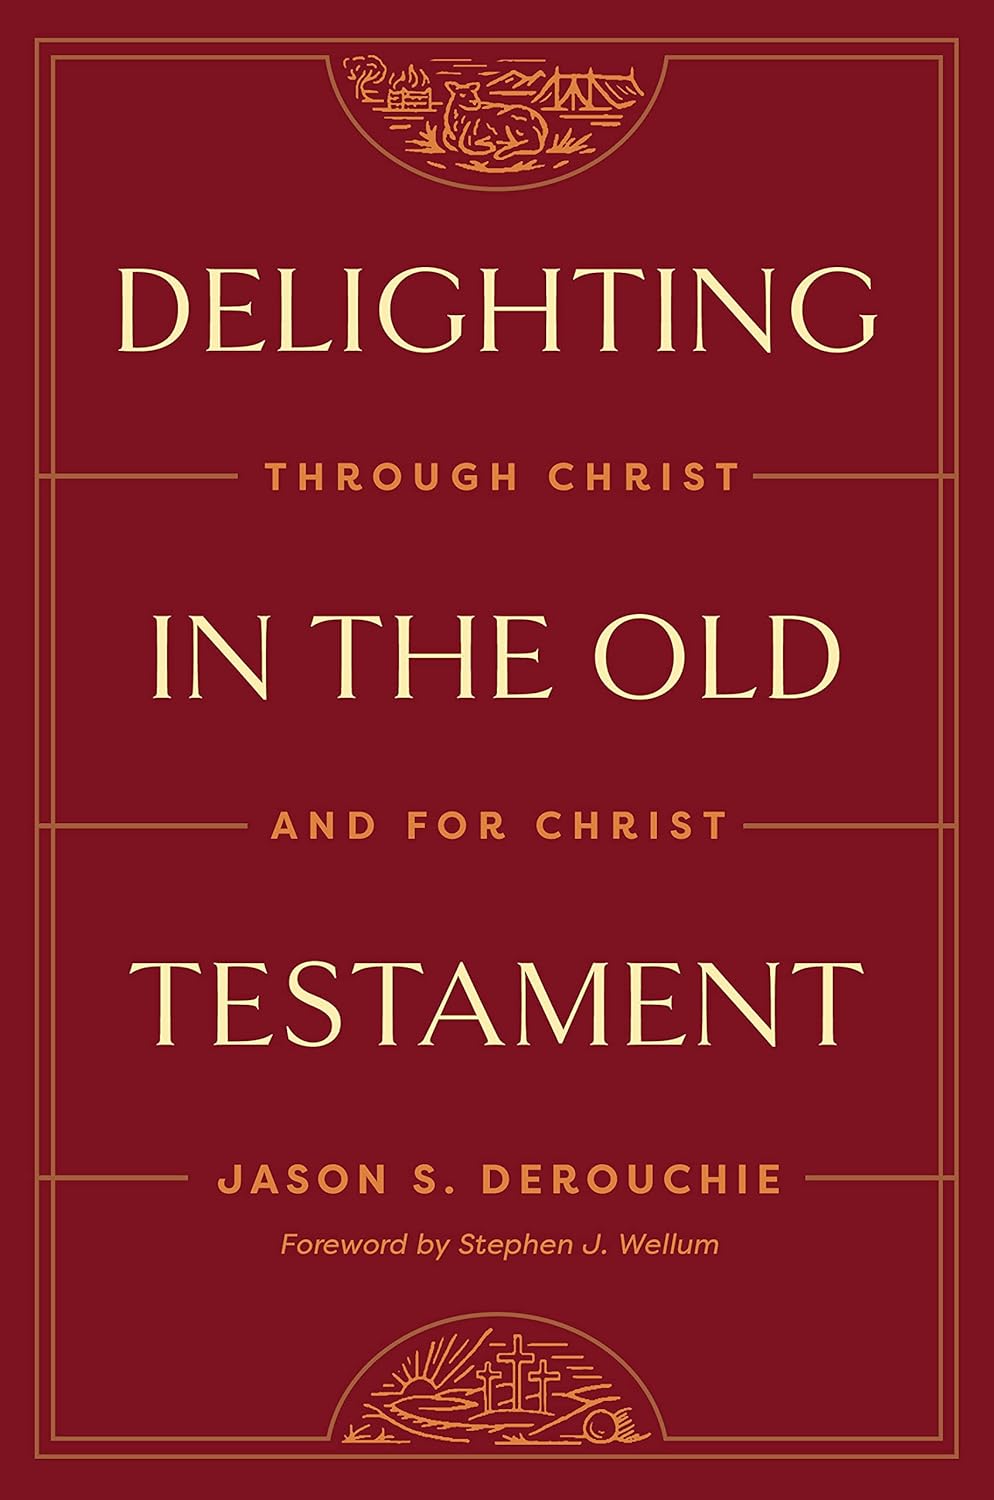 Fall in Love with the Old Testament - Anglican Mainstream